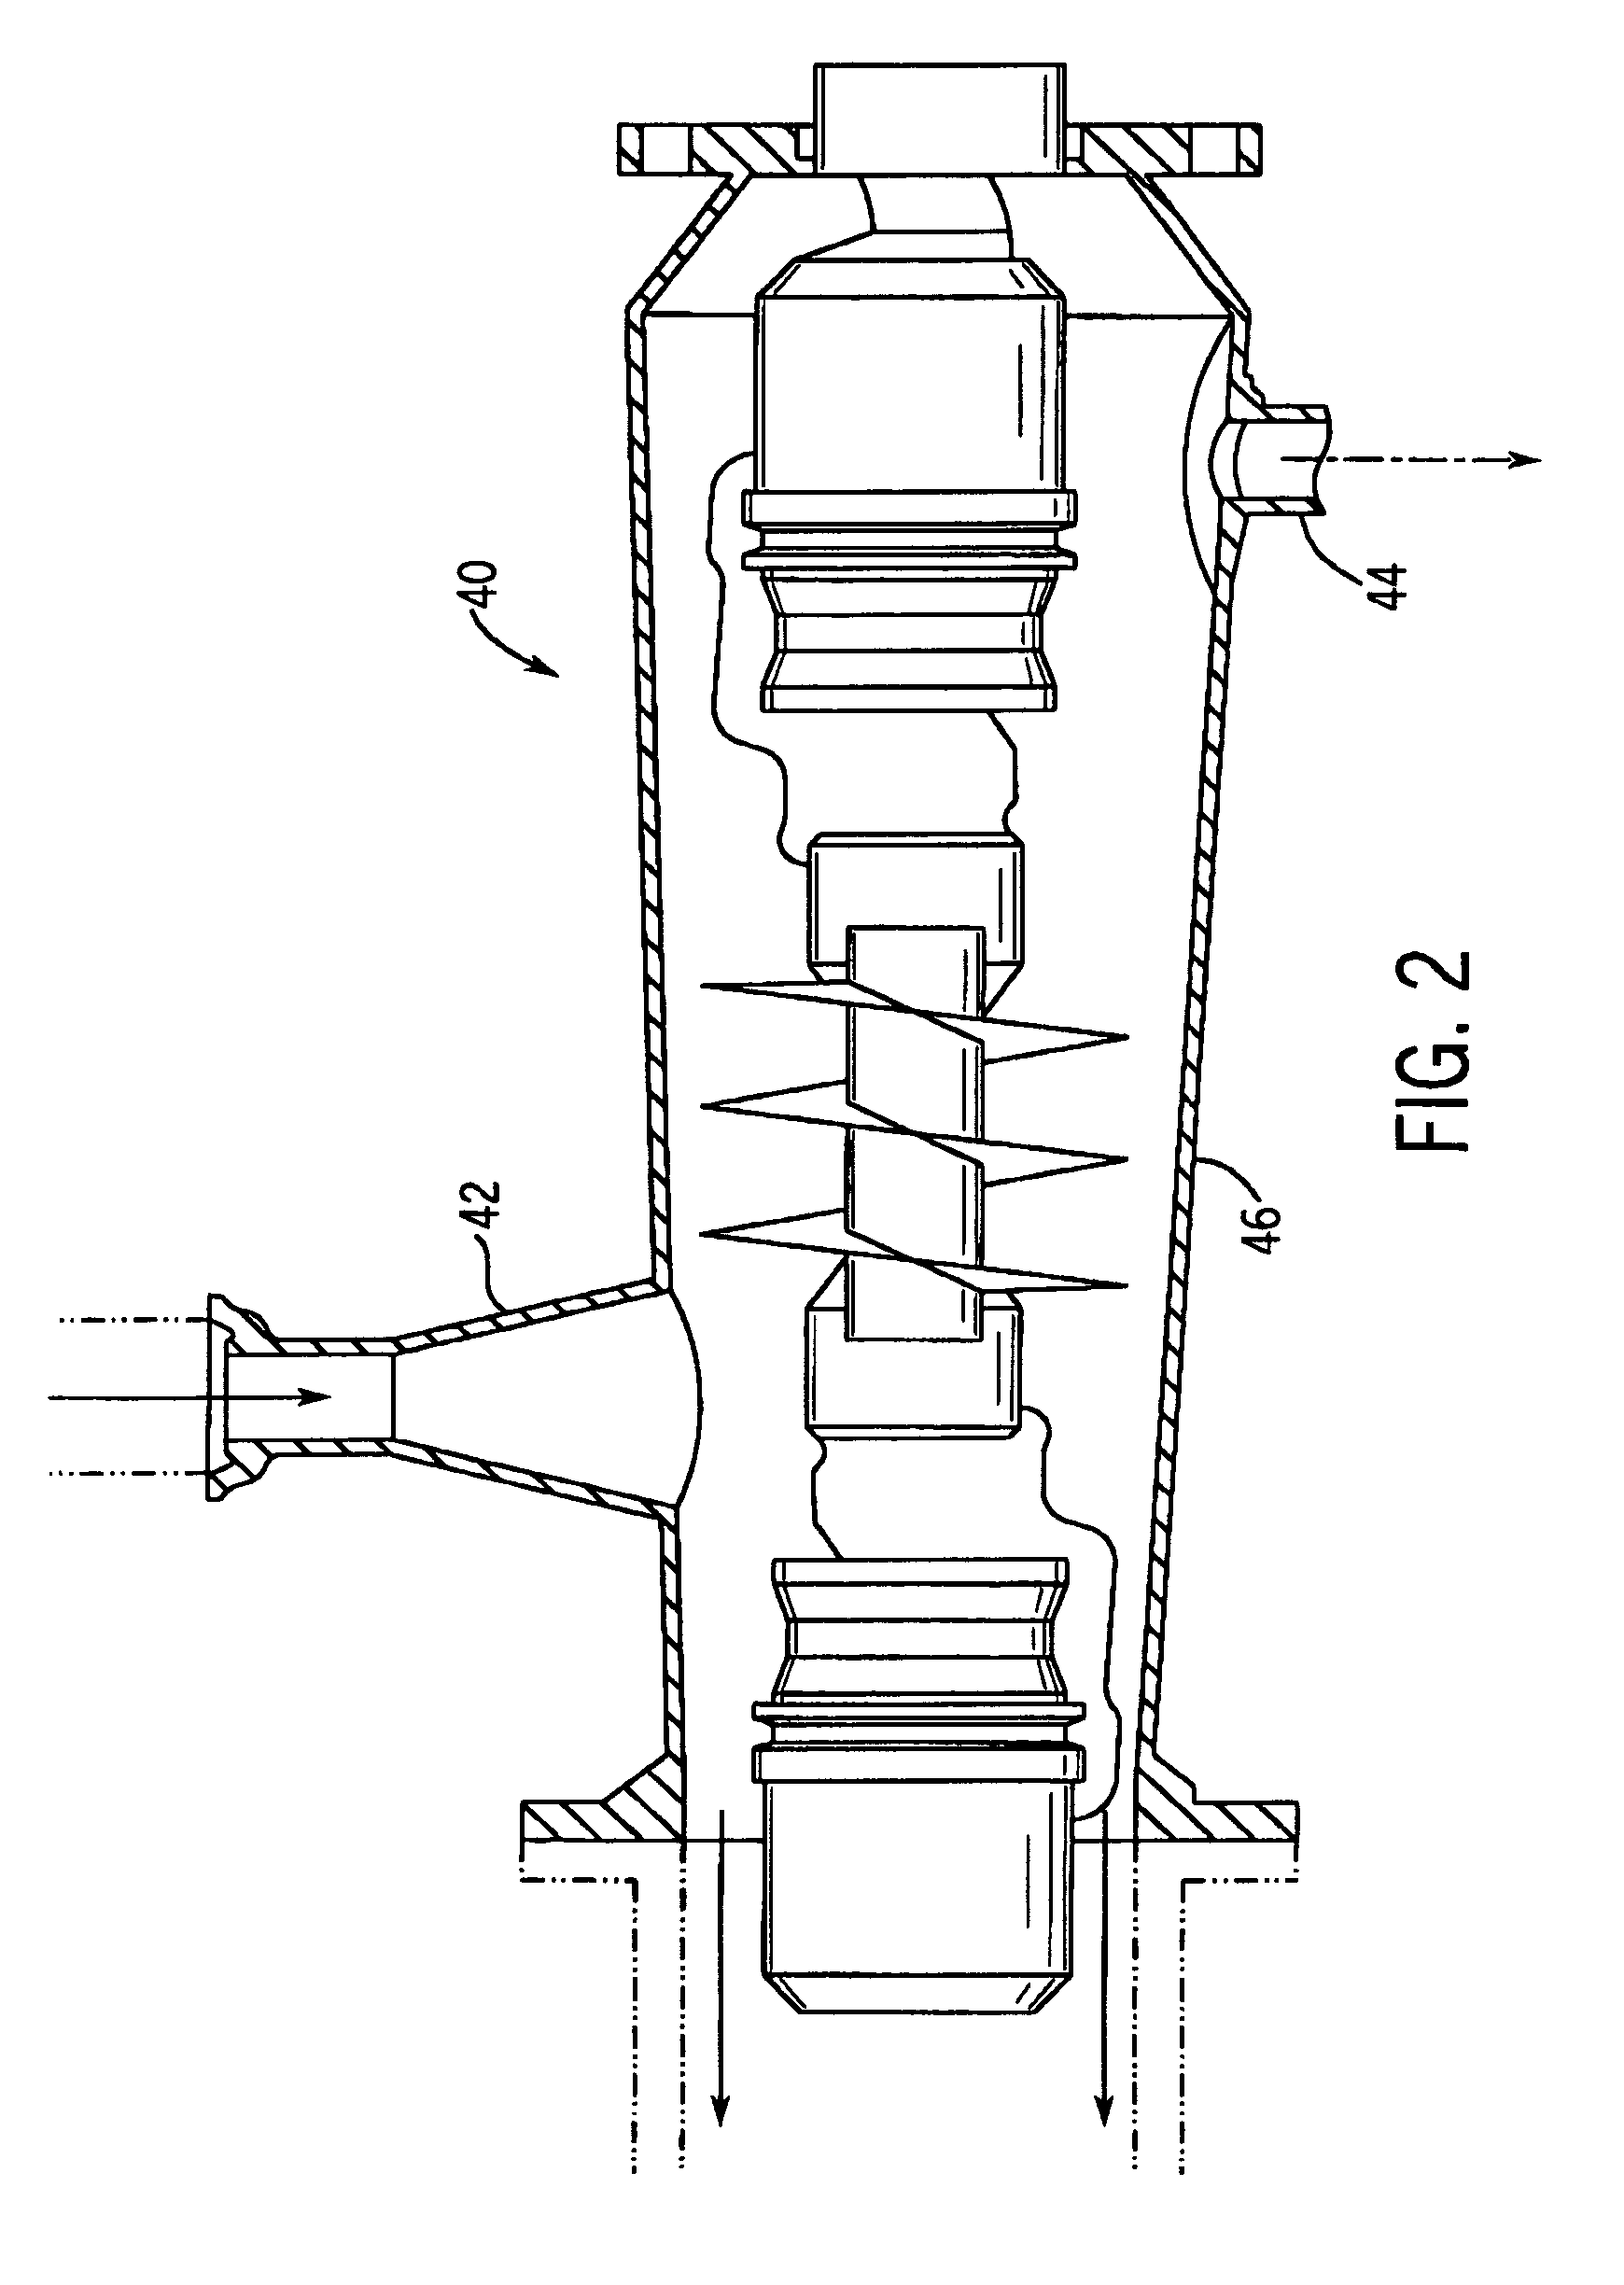 Aseptic processing system for fruit filling